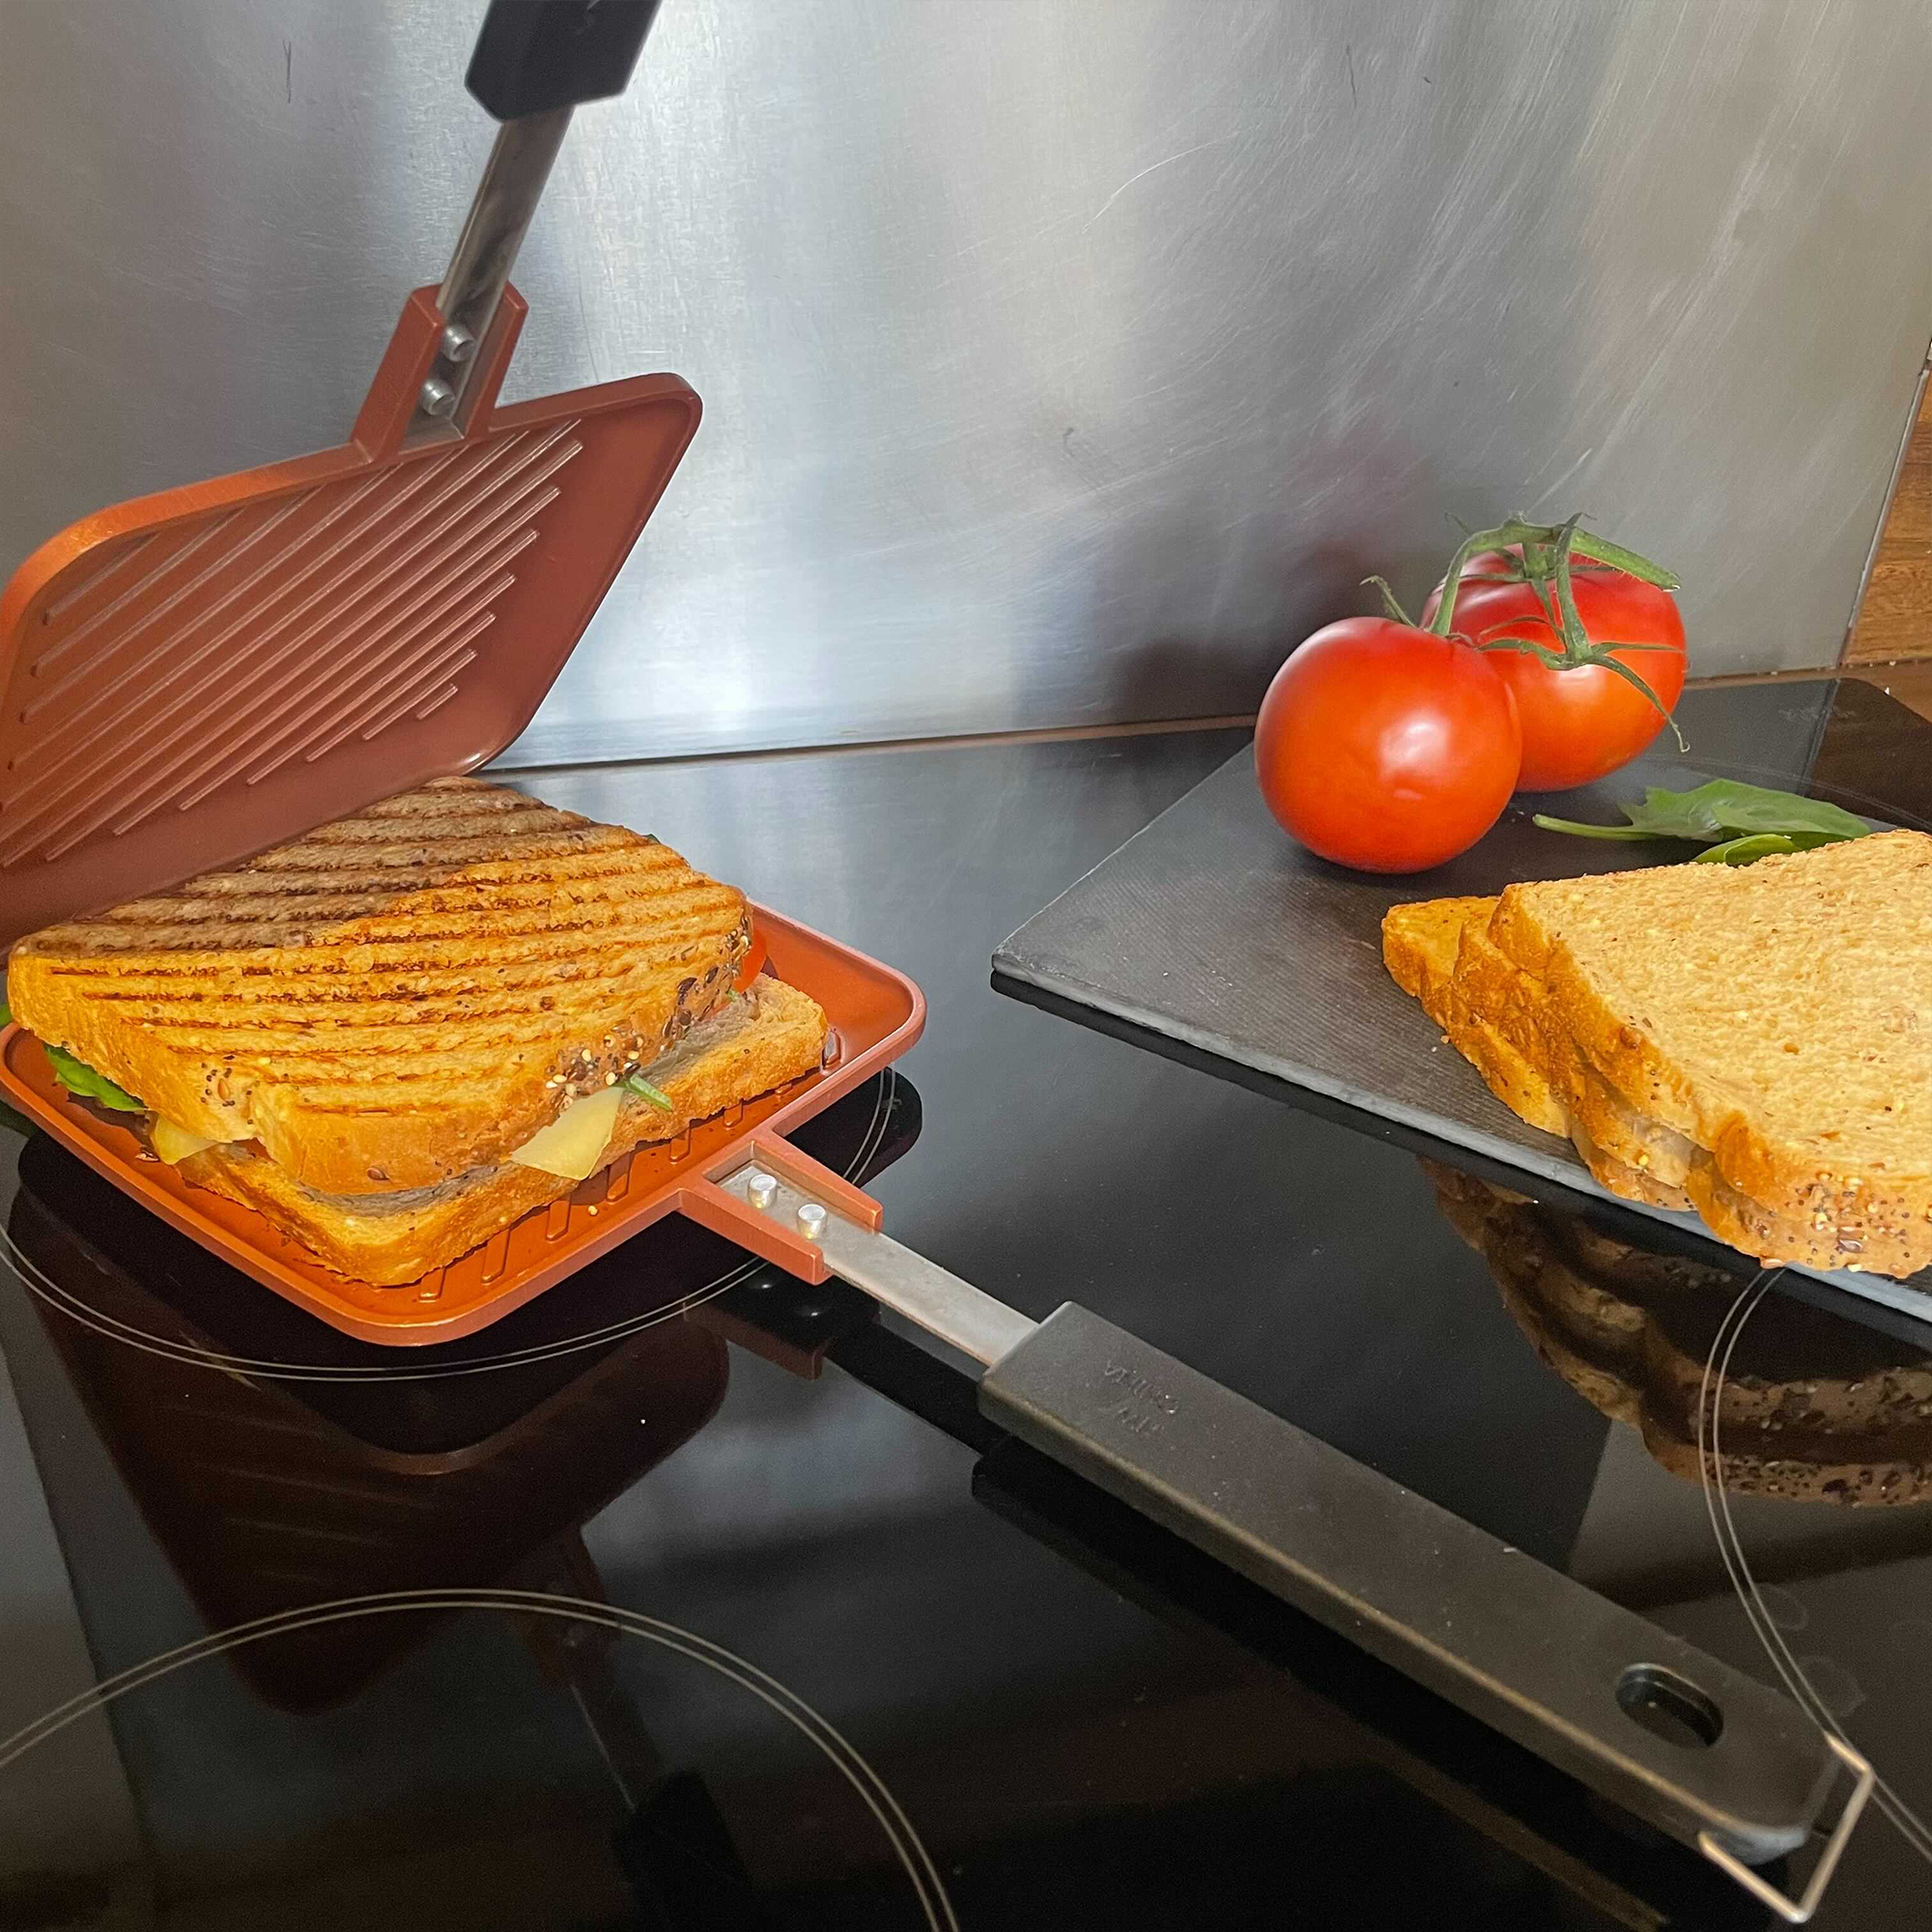 Toasted Sandwich Maker - Panini Press or Grilled Cheese Maker - Stove Top  Toastie Non-Stick Ideal for Indoors and Outdoors by Jean Patrique